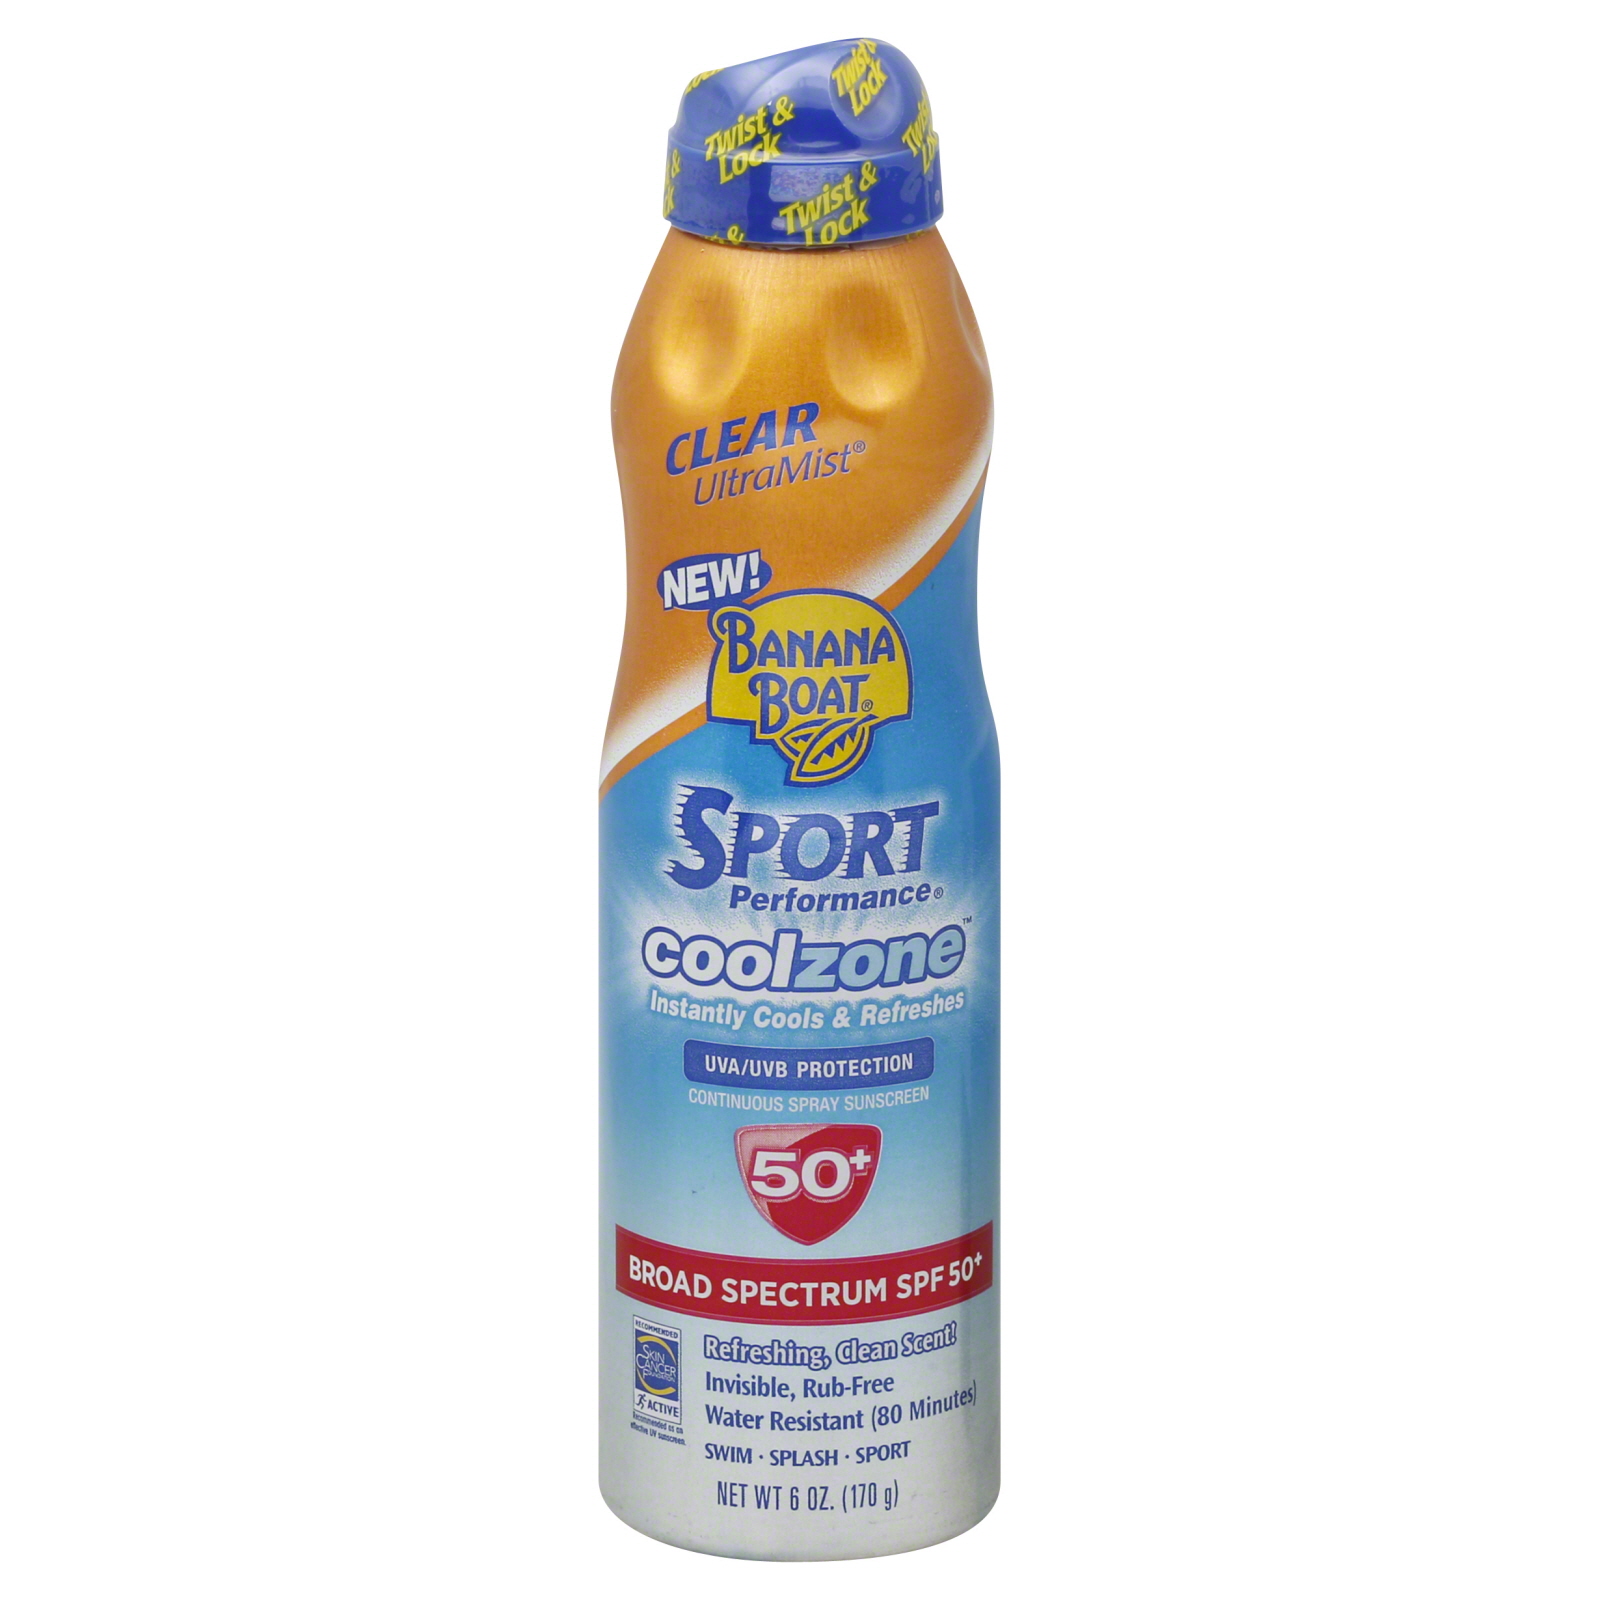 Banana Boat Sport Performance Cool Zone, Continuous Spray, SPF 50, 6 oz